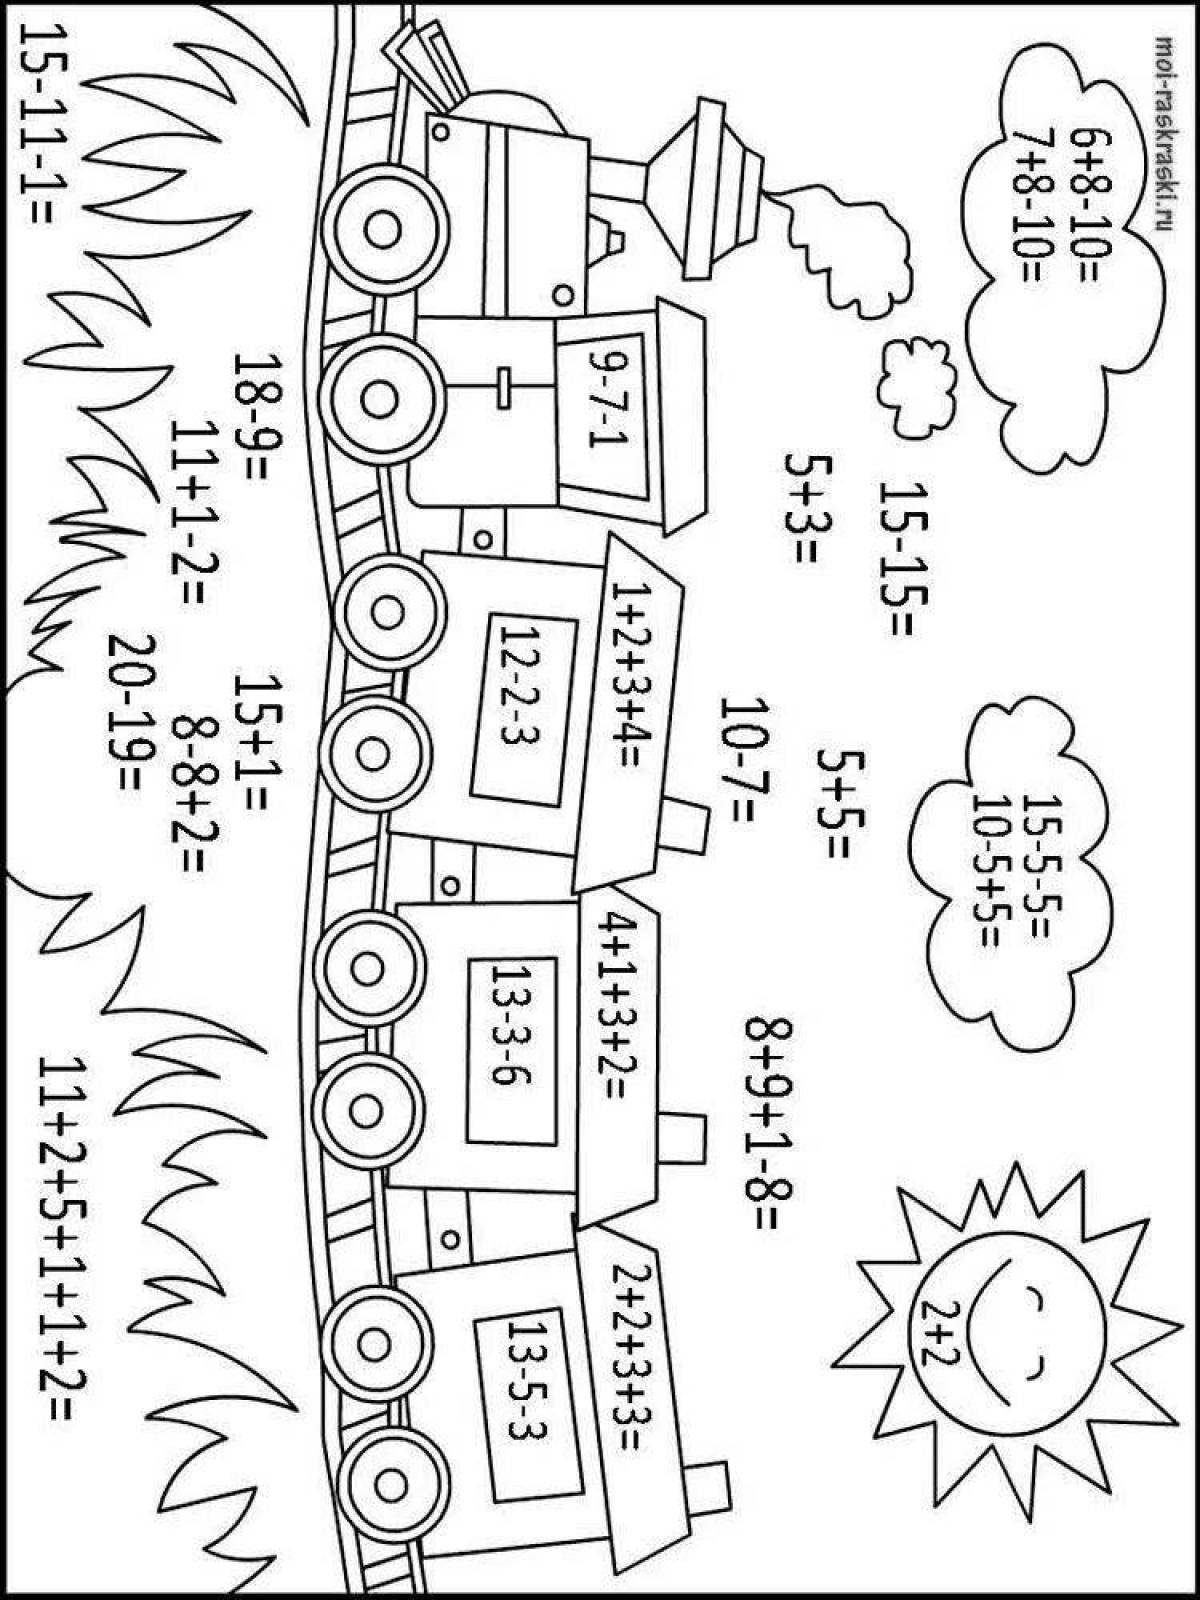 Mi playful coloring page